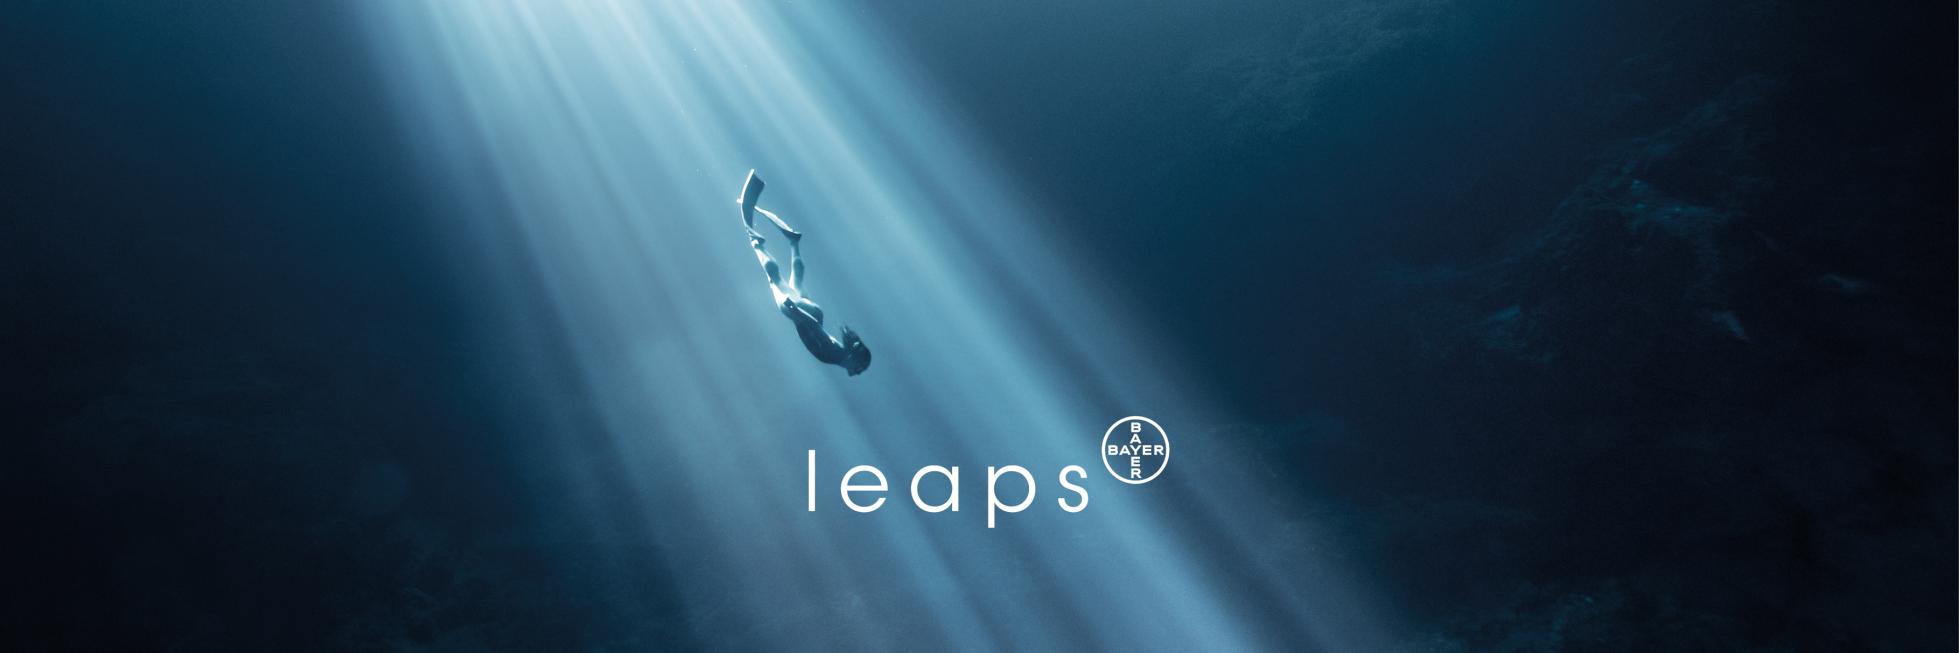 Bayer Leaps Logo with diver